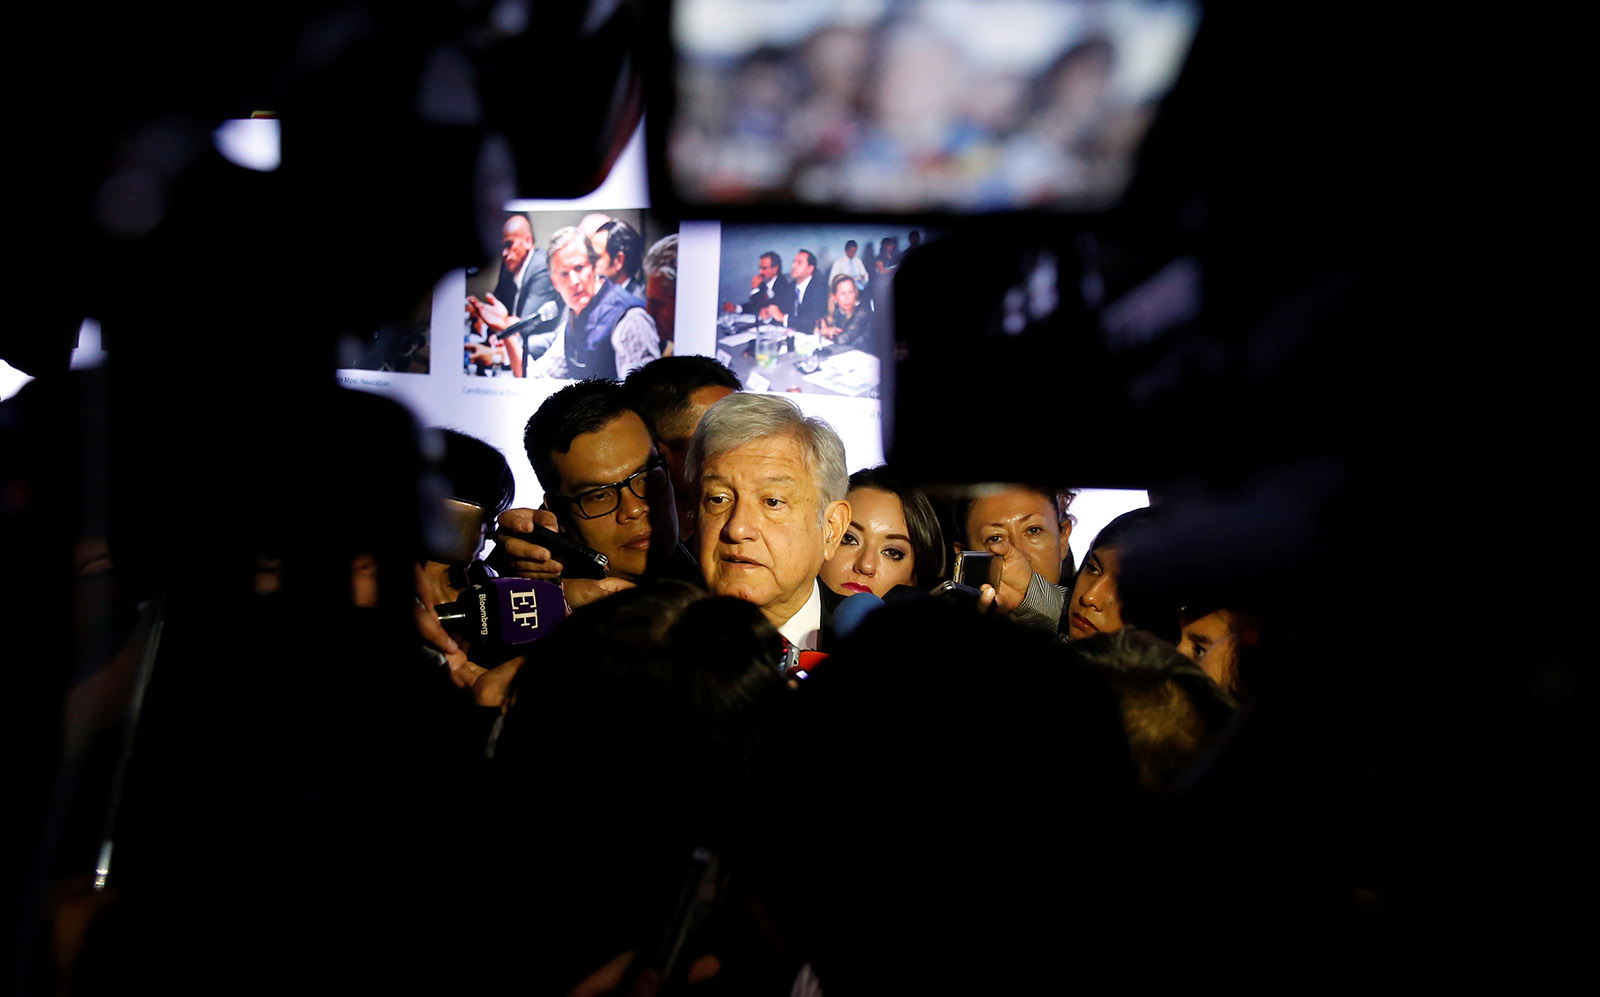 Presidential candidate Andrés Manuel López Obrador speaking to the press in Mexico City, on March 7, 2018